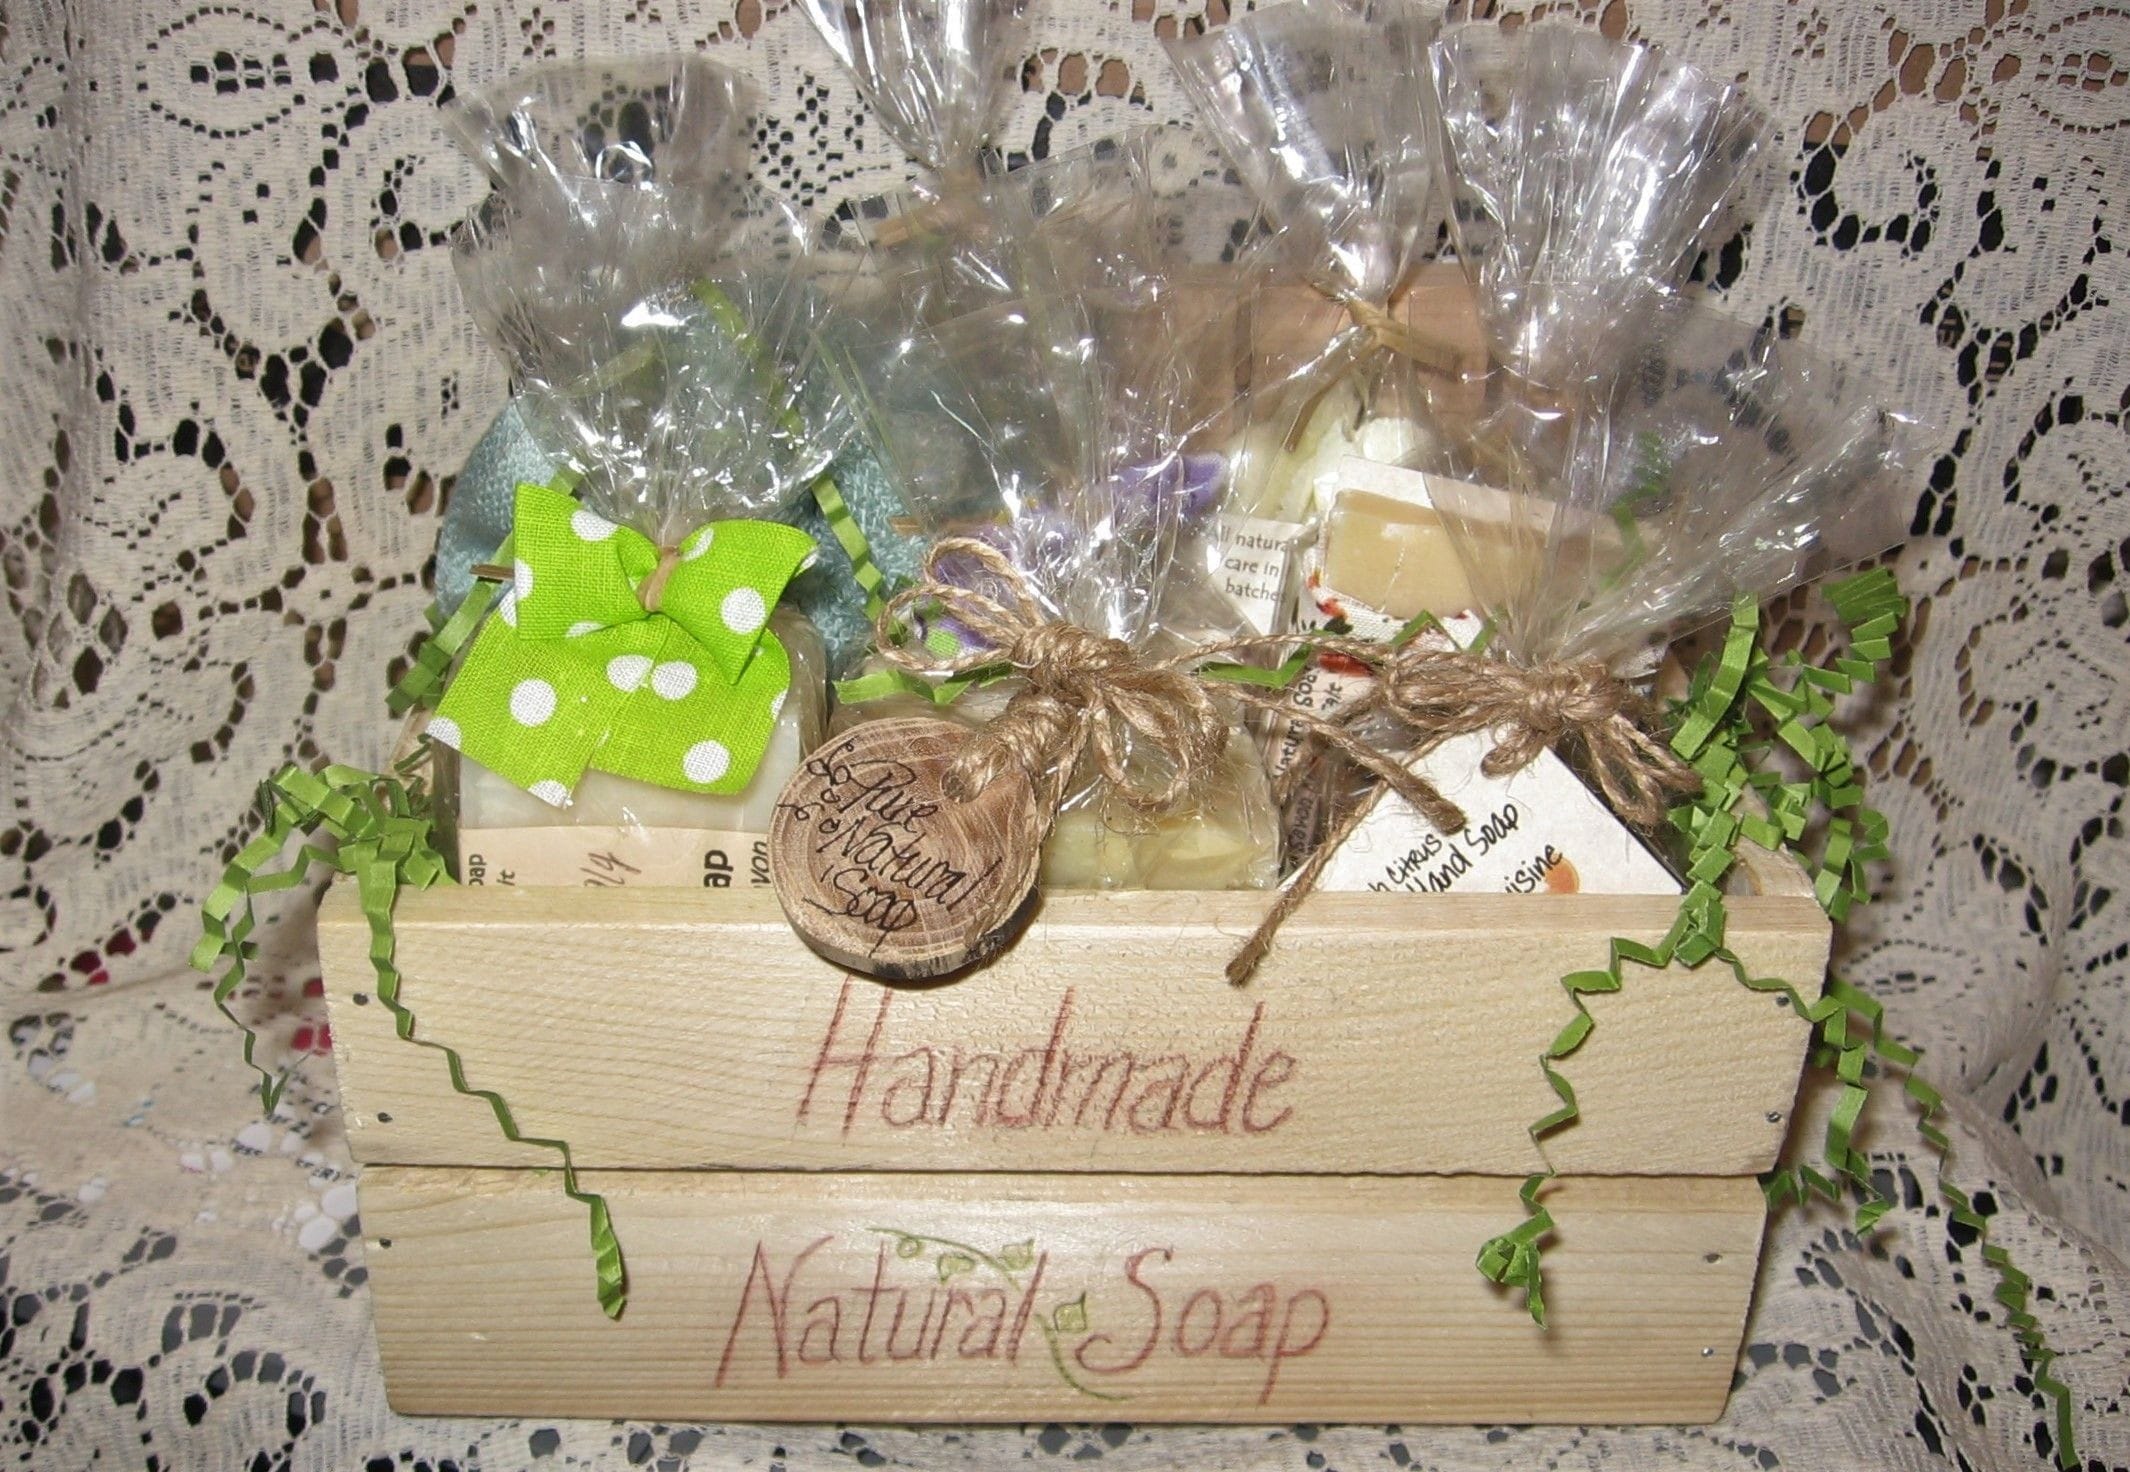 Handmade in Canada reasonably priced all natural soap gift collections in all price ranges.  An ethical and ecological biodegradable gift made with care.